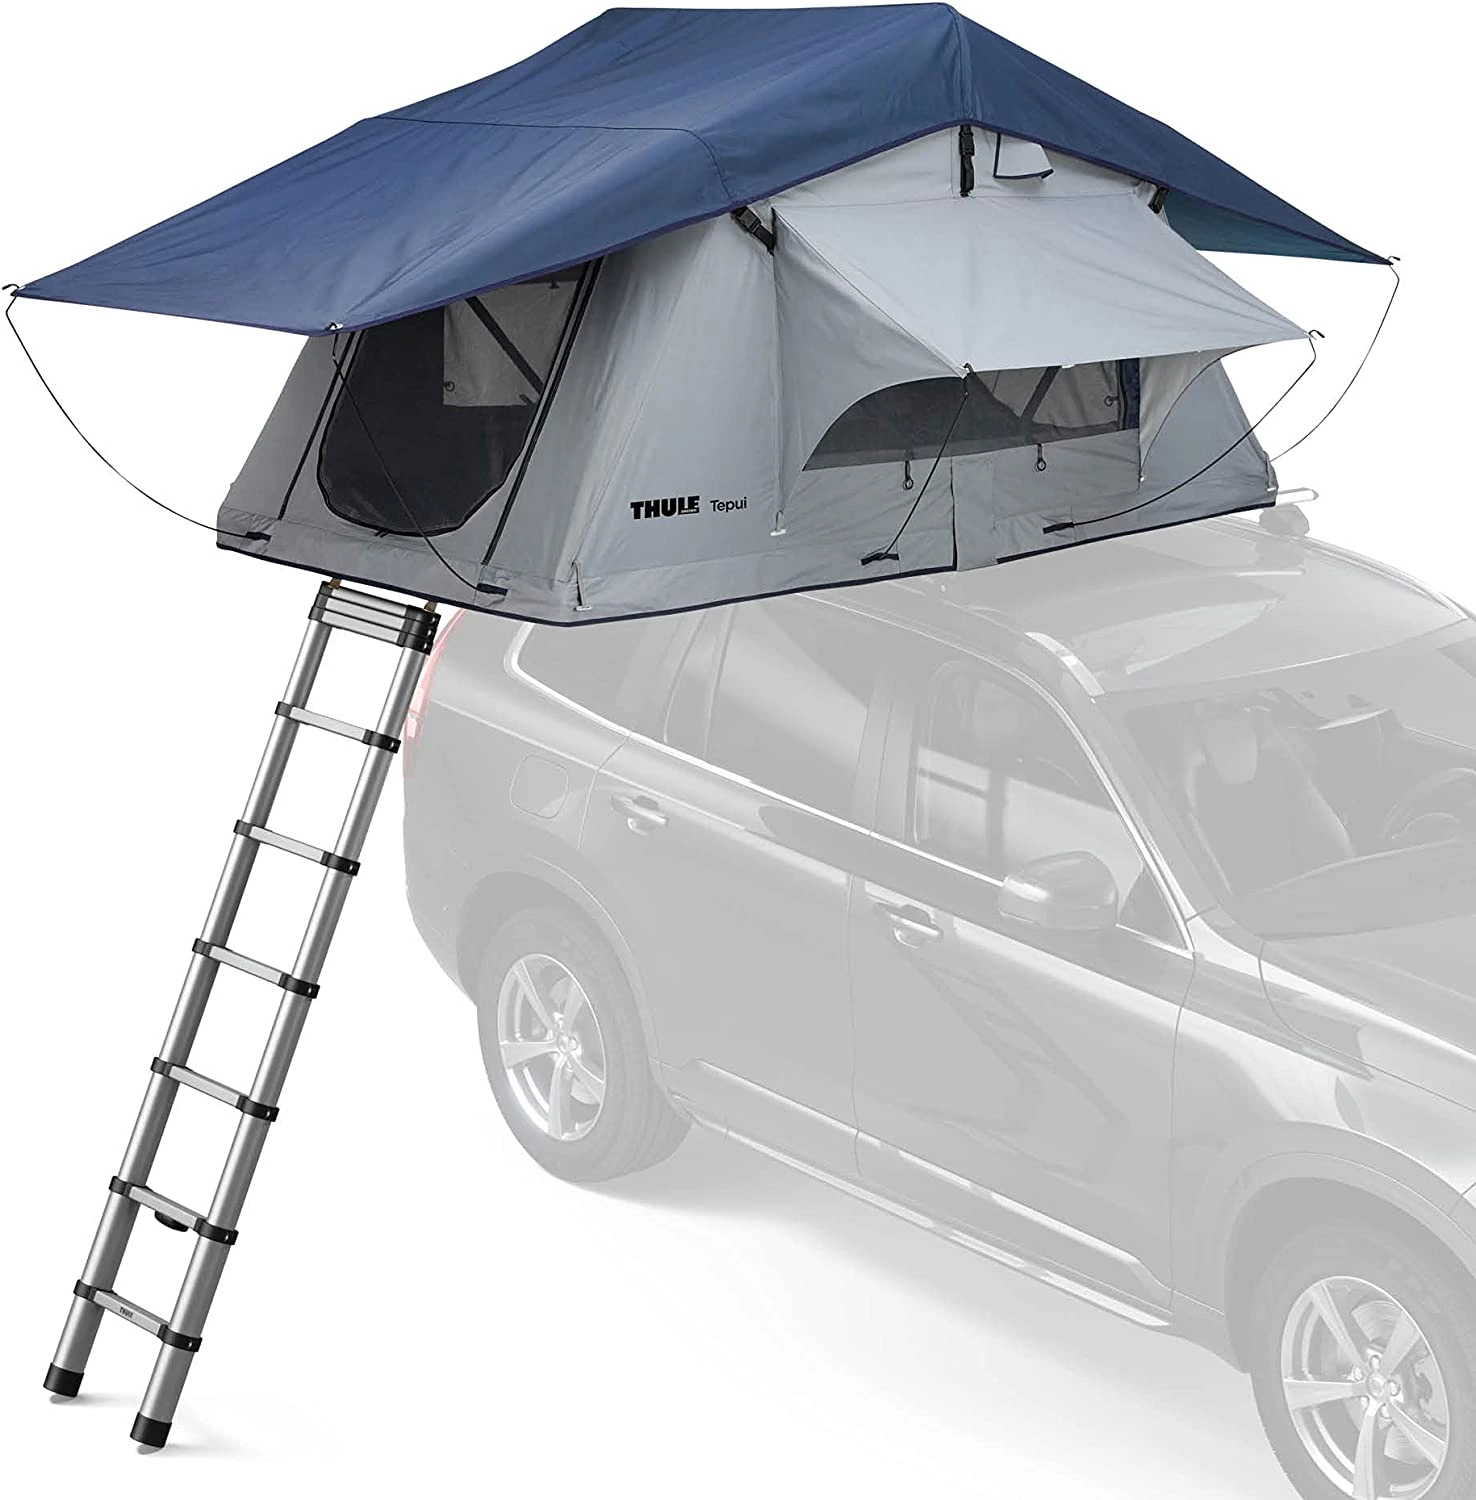 Thule Tepui kukenam roof top tent for SUVs and Jeeps